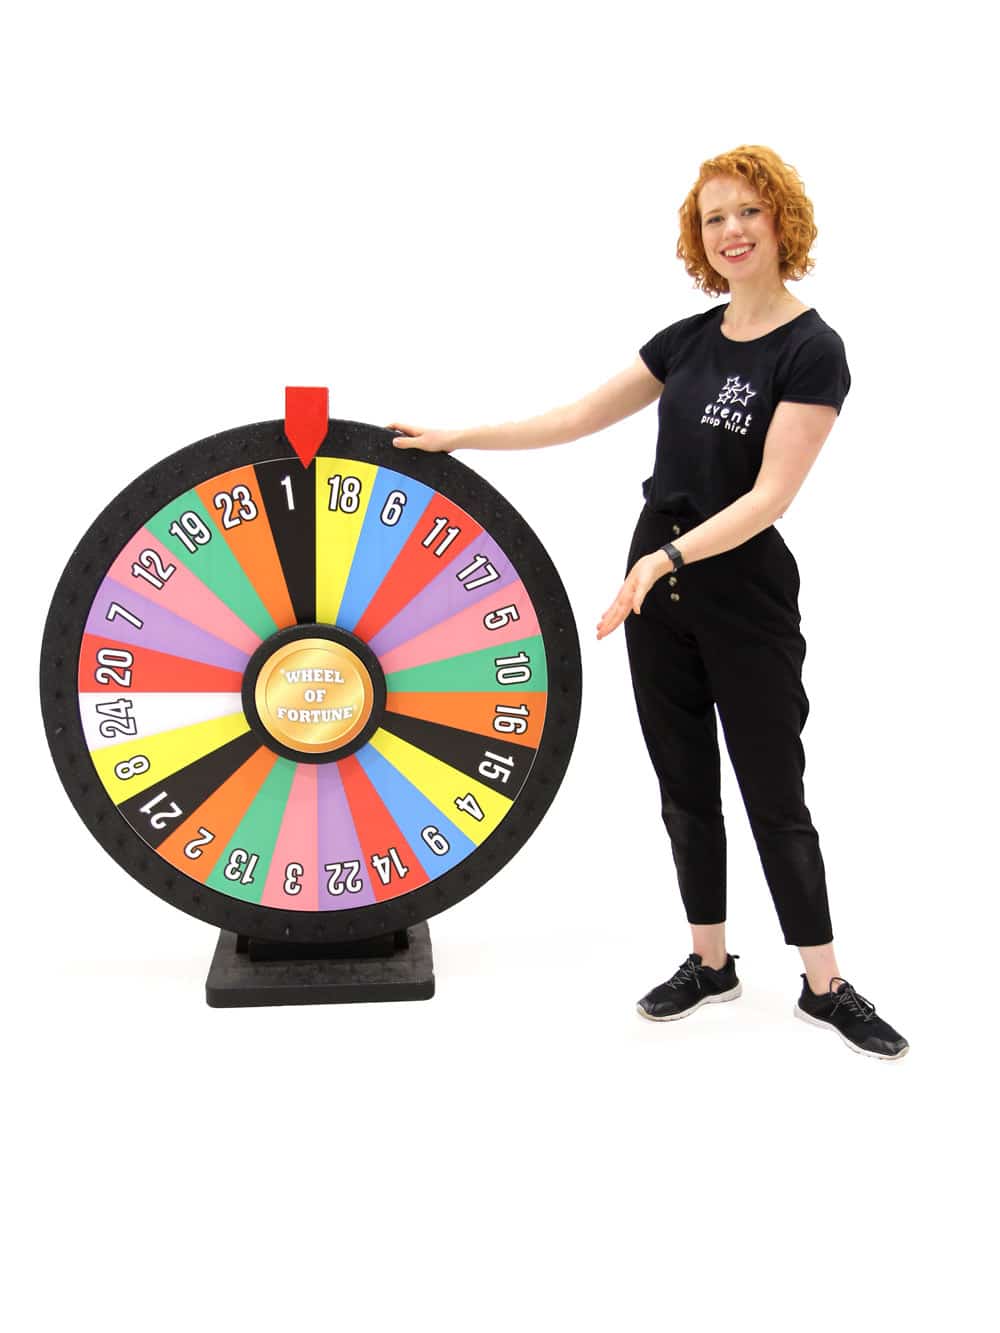 Camrips Stripchat Wheel Of Fortune